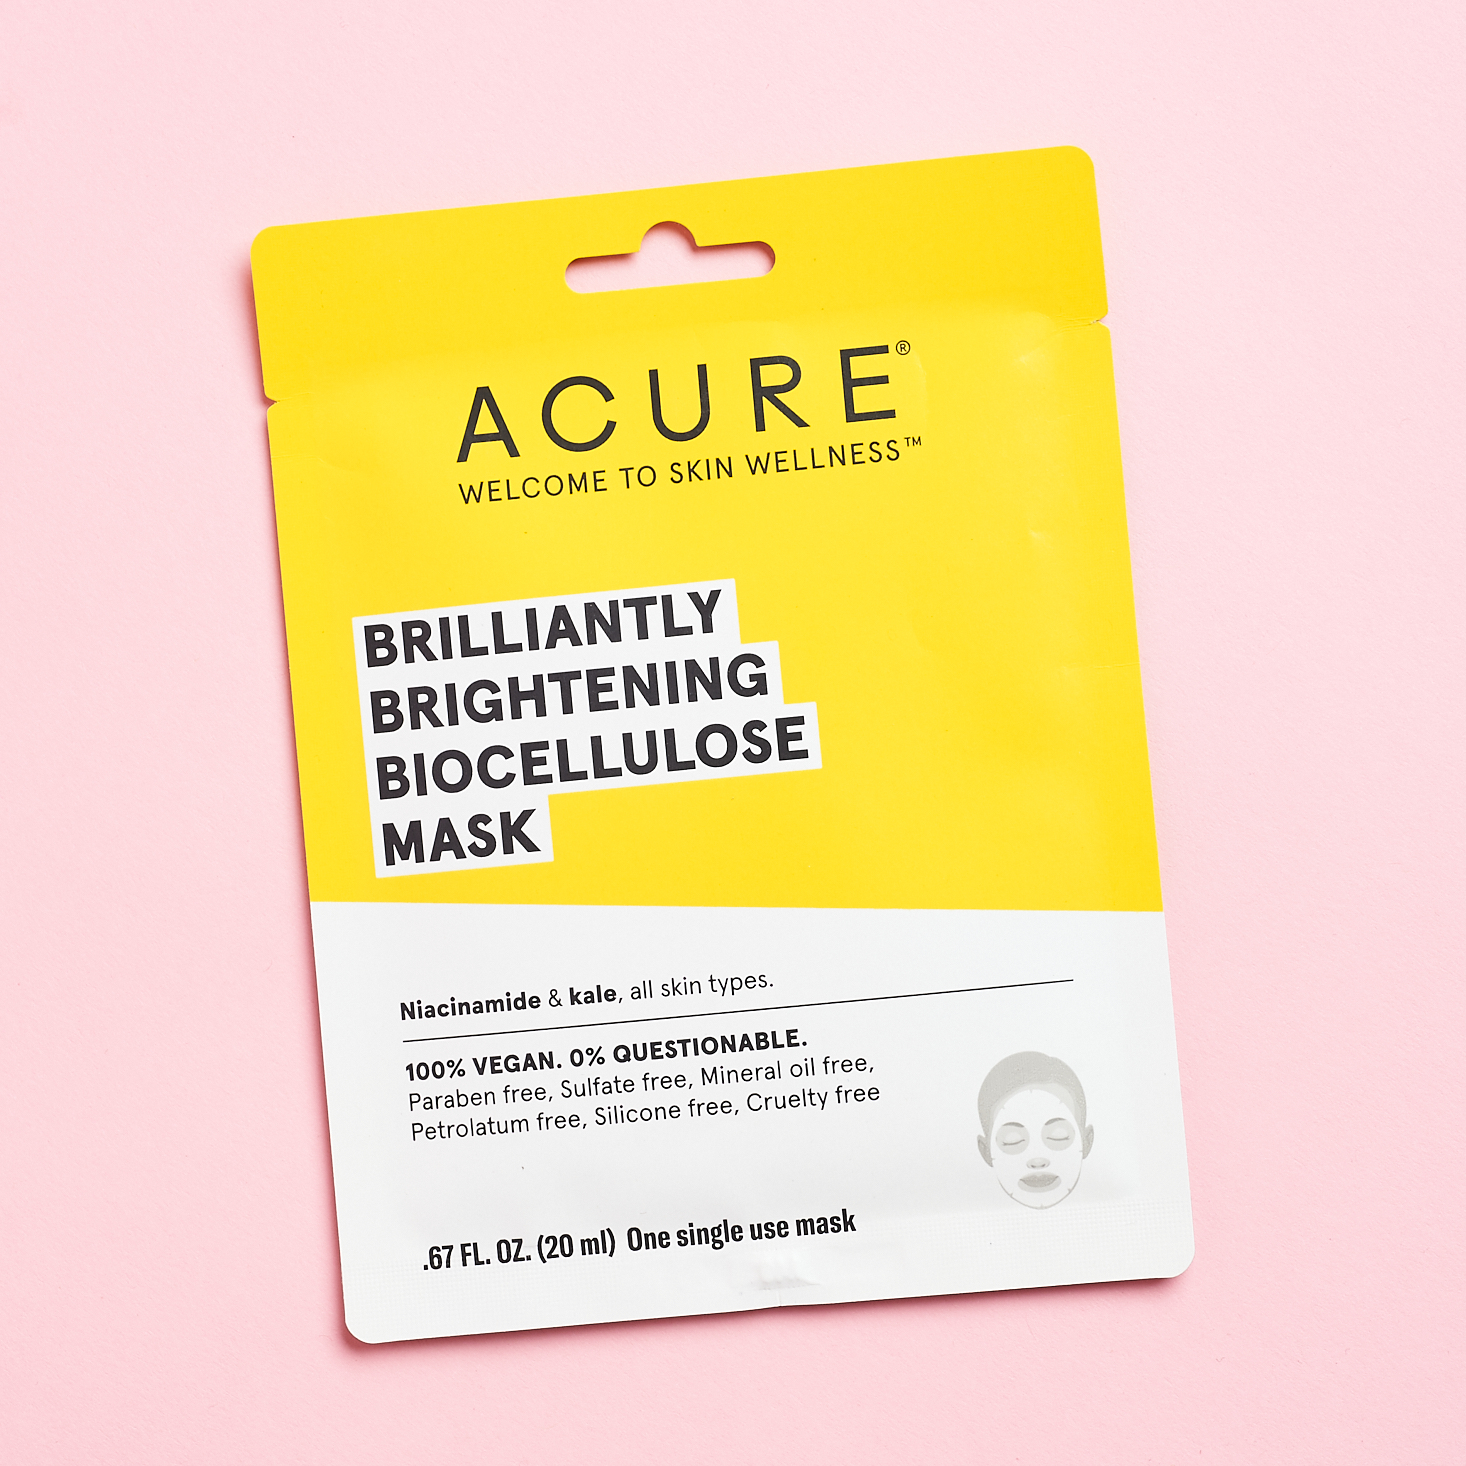 Acure Brilliantly Brightening Biocellulose Mask